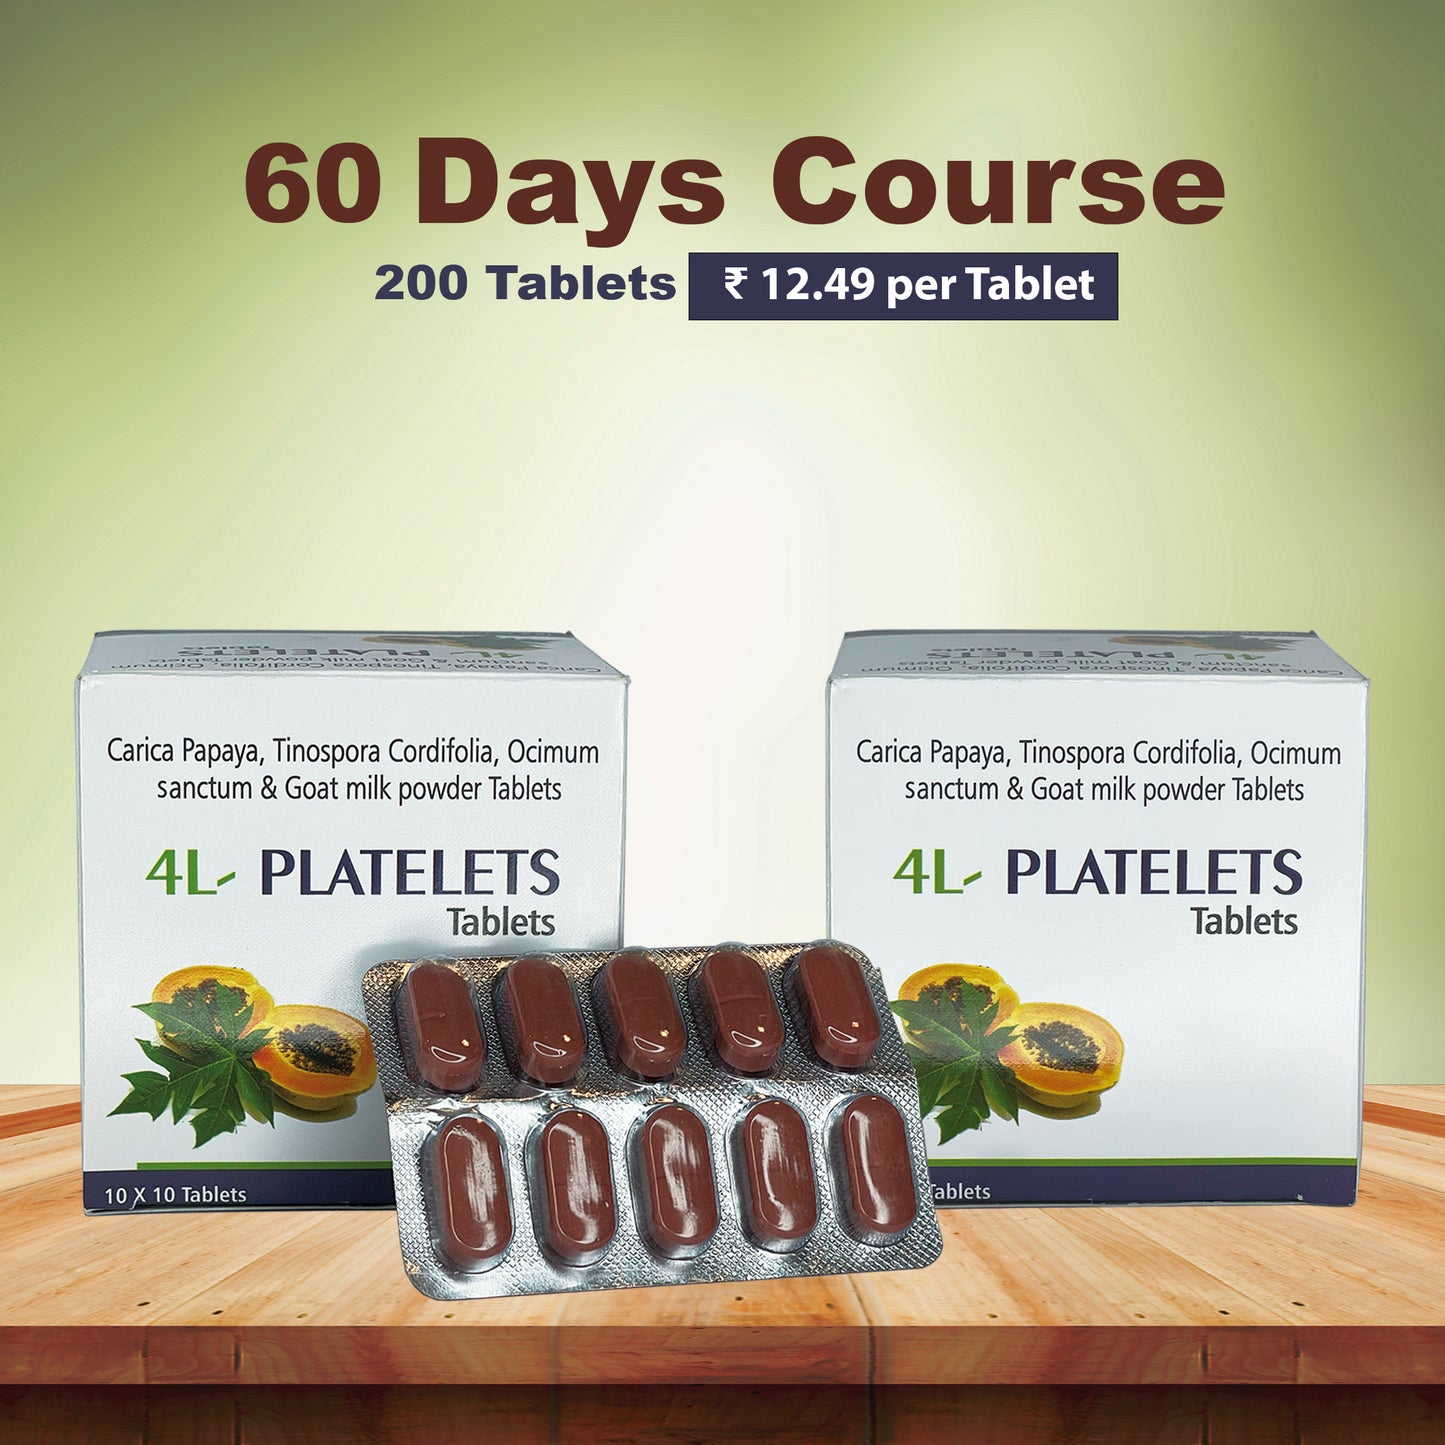 4L-PLATELETS Tablets | Liver Detox + Platelets Recovery Support